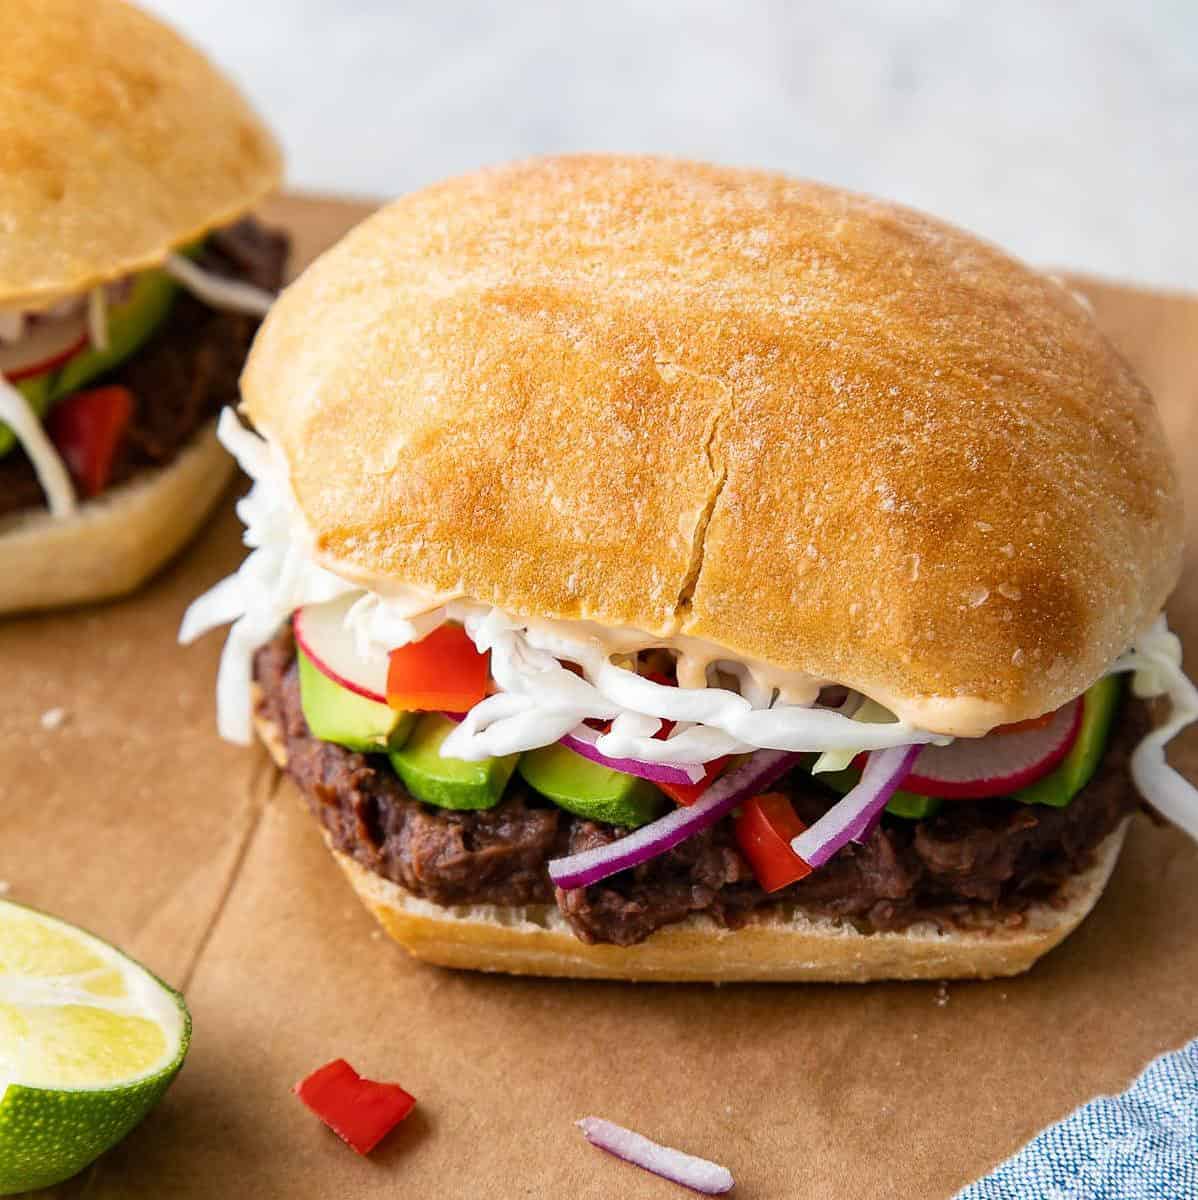  The perfect mix of crunchy, creamy, and zesty components in this torta.